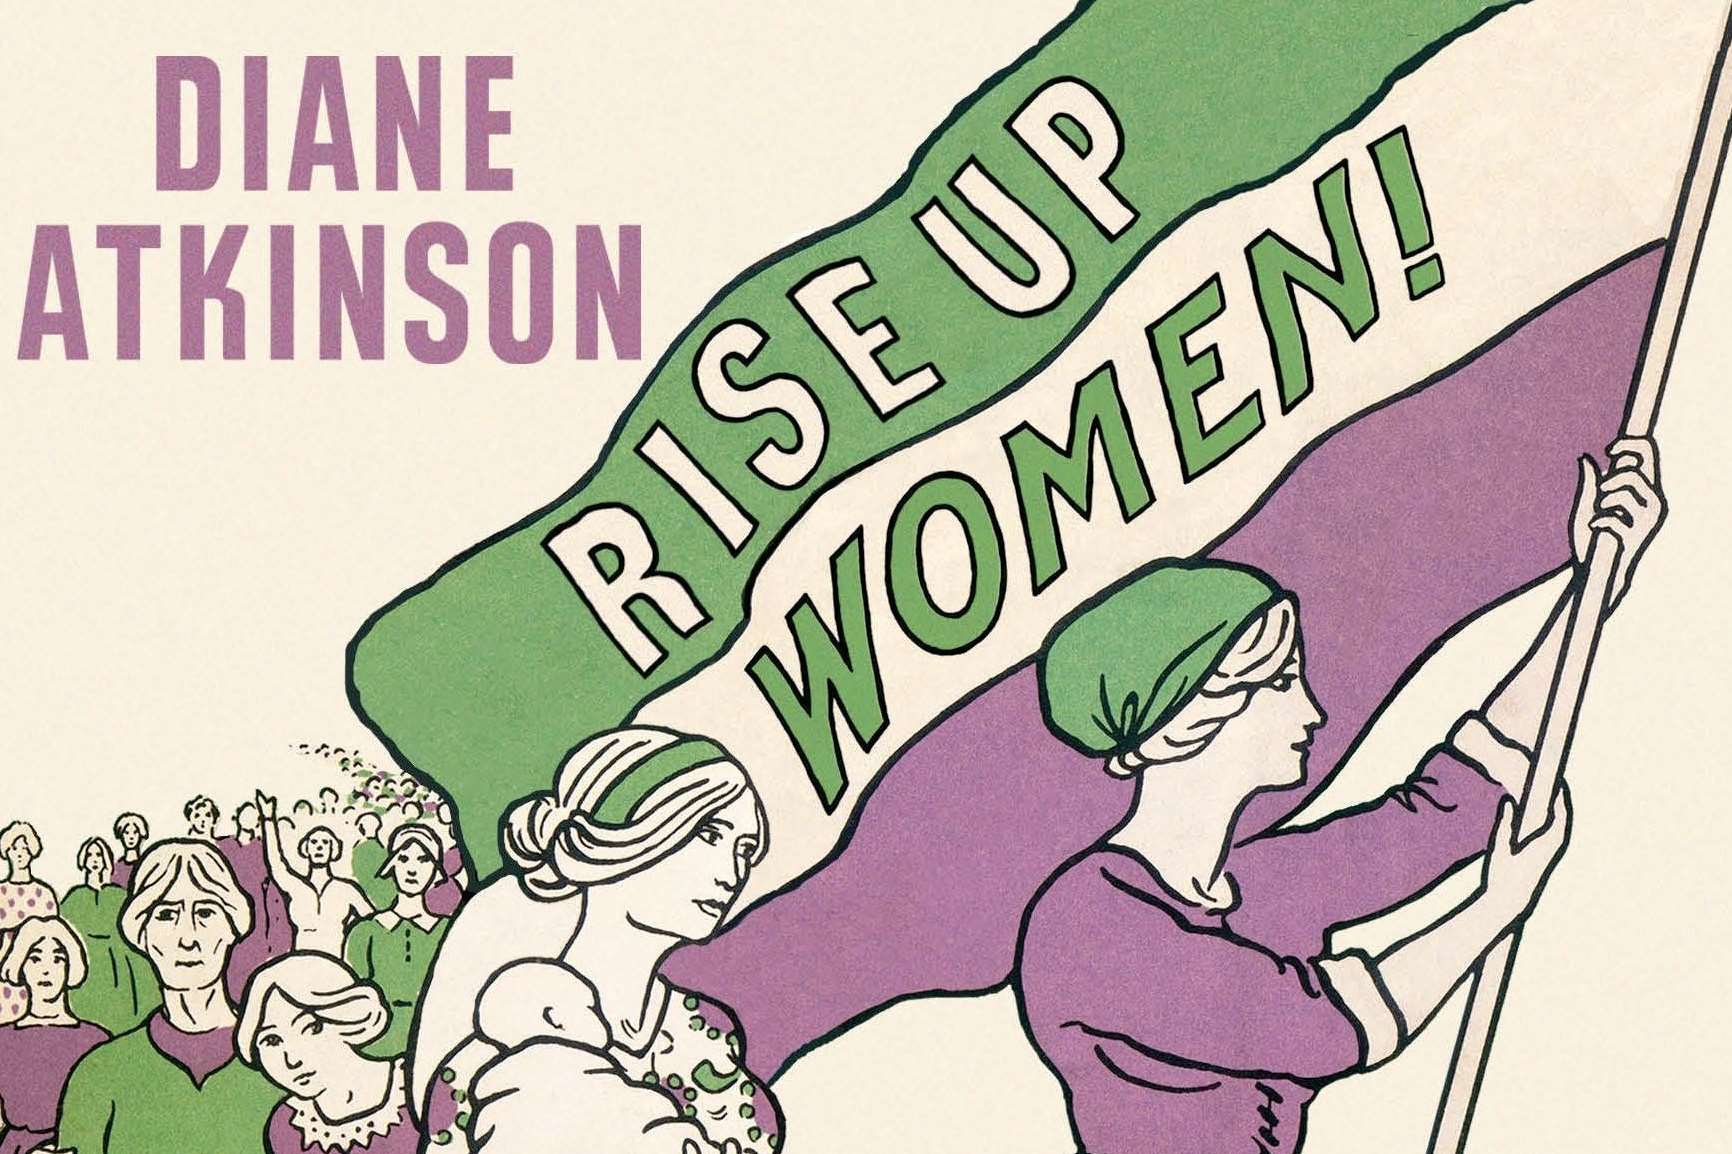 Diane Atkinson's Rise Up Women! Picture: Bloomsbury/PA